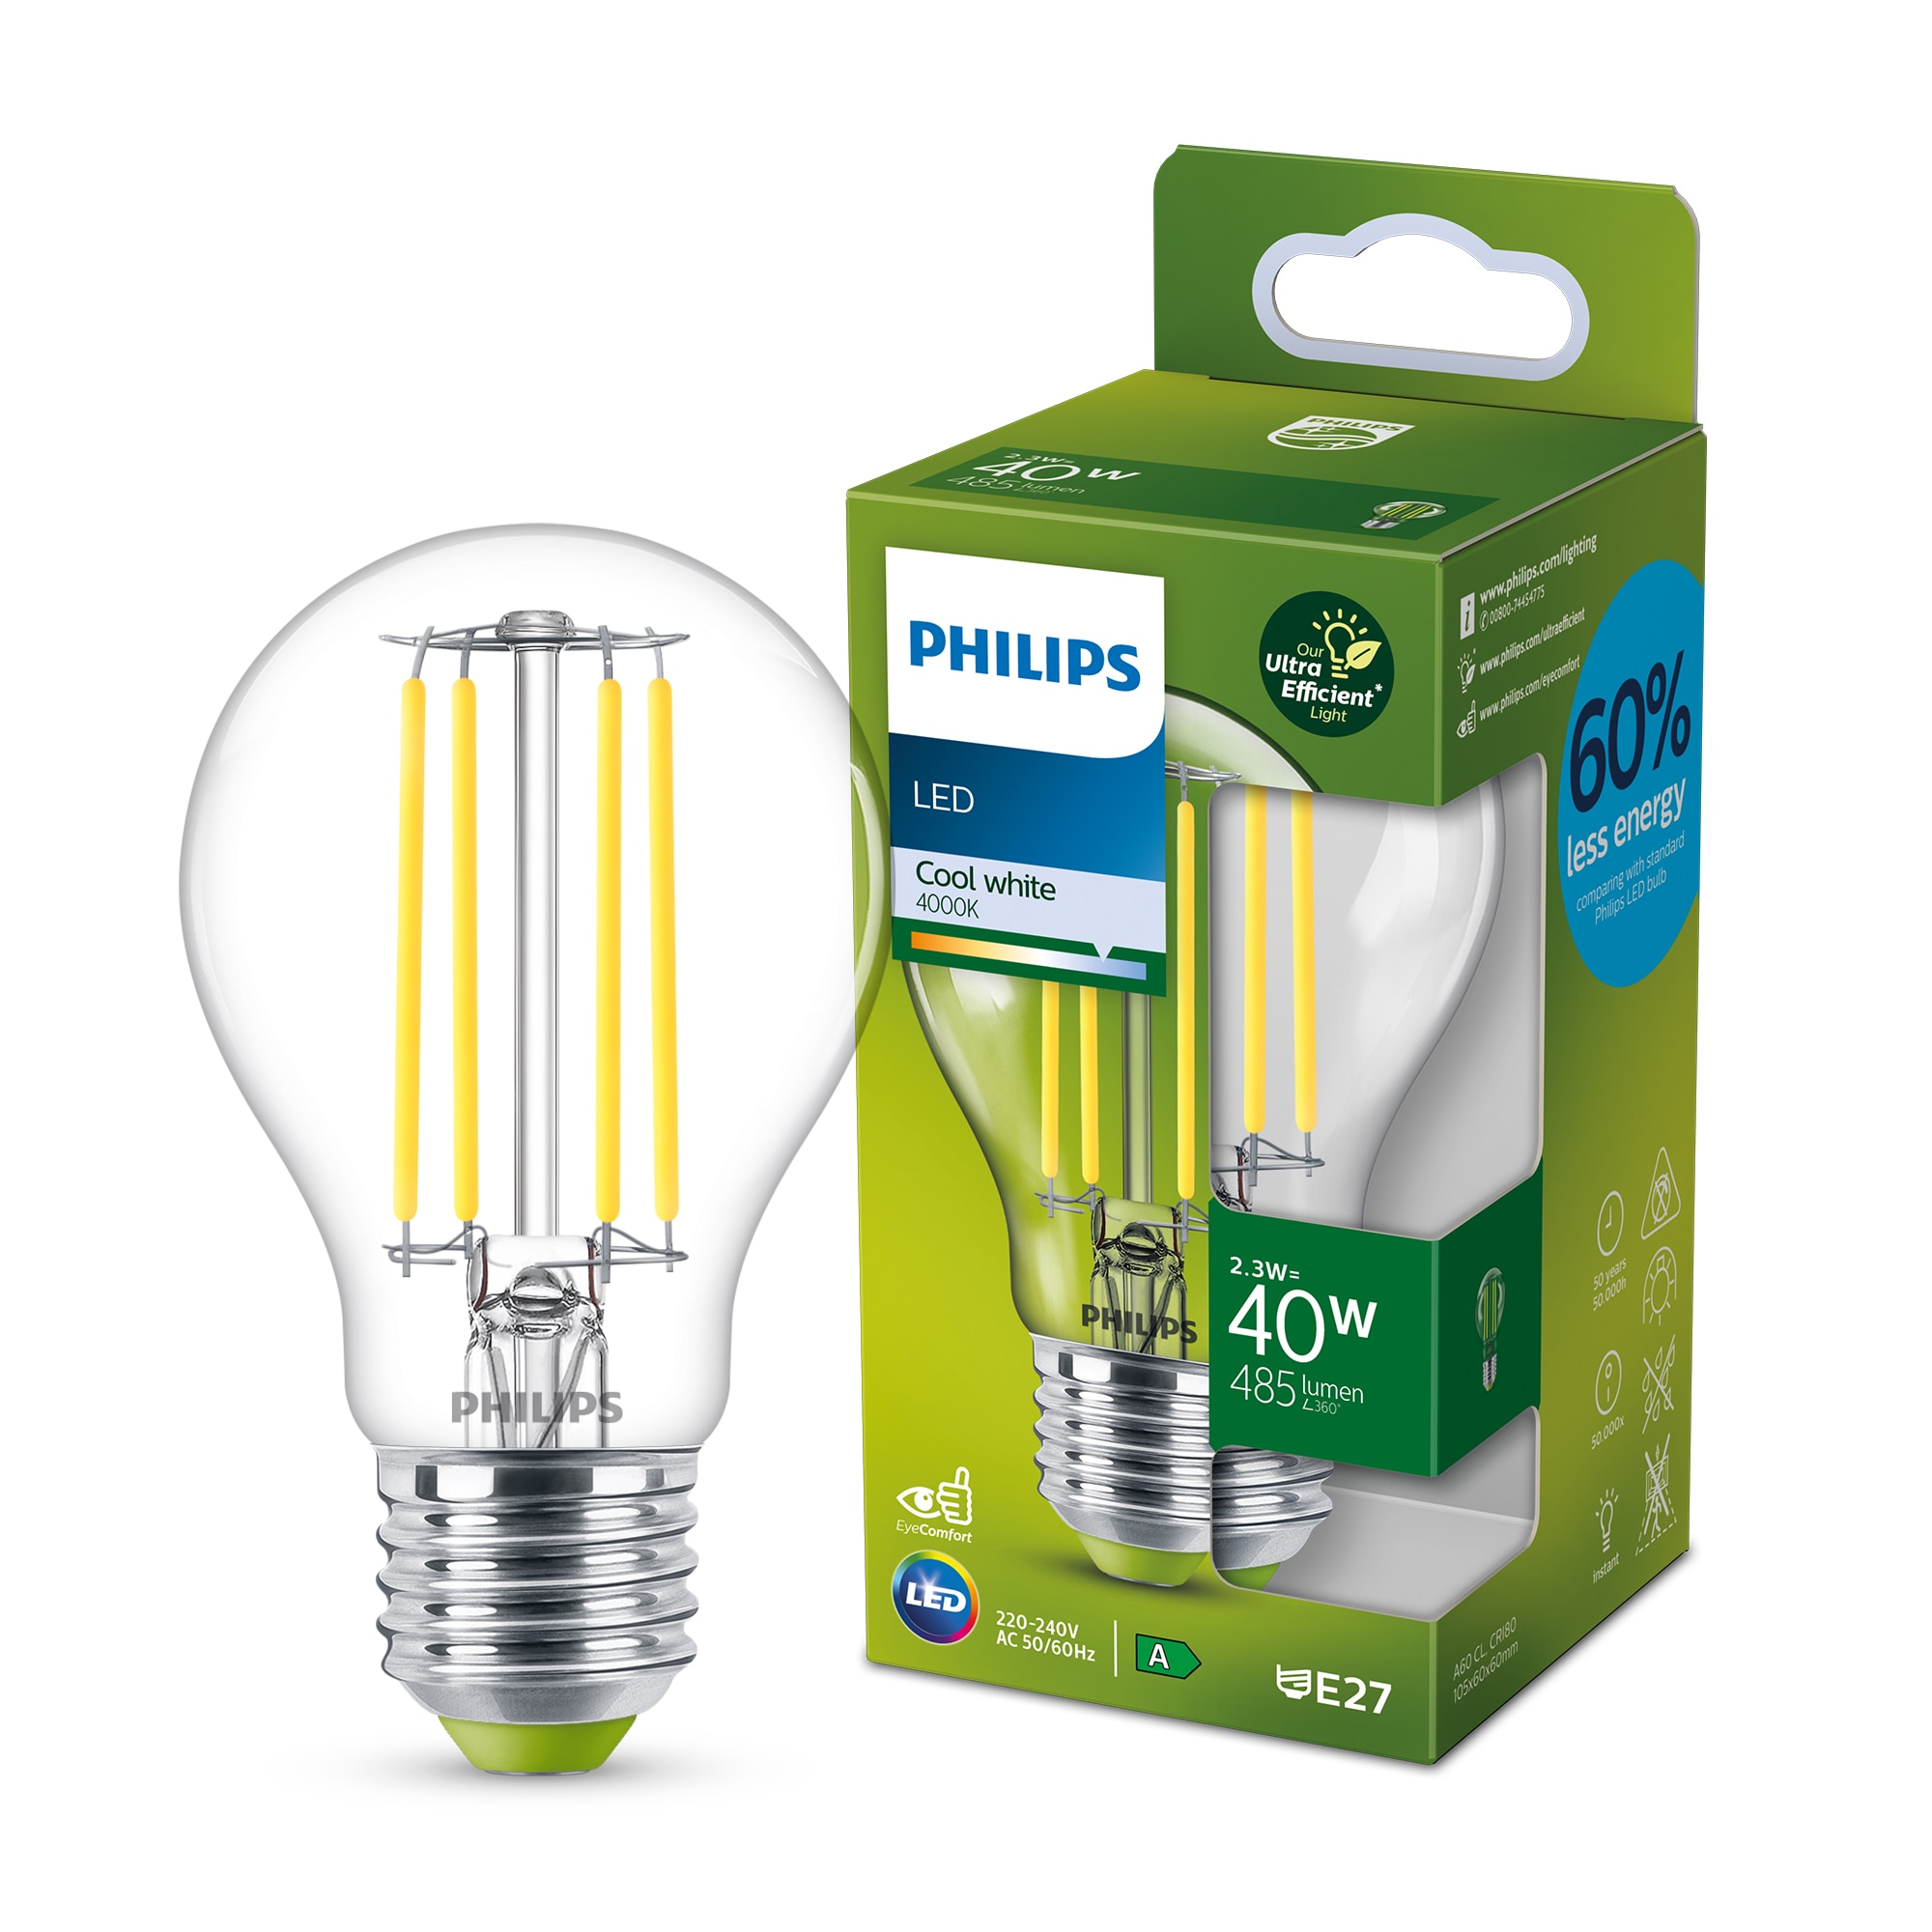 Hollywood voorzichtig Aanvulling Philips LED's most energy-efficient A-class bulbs | Signify Company Website